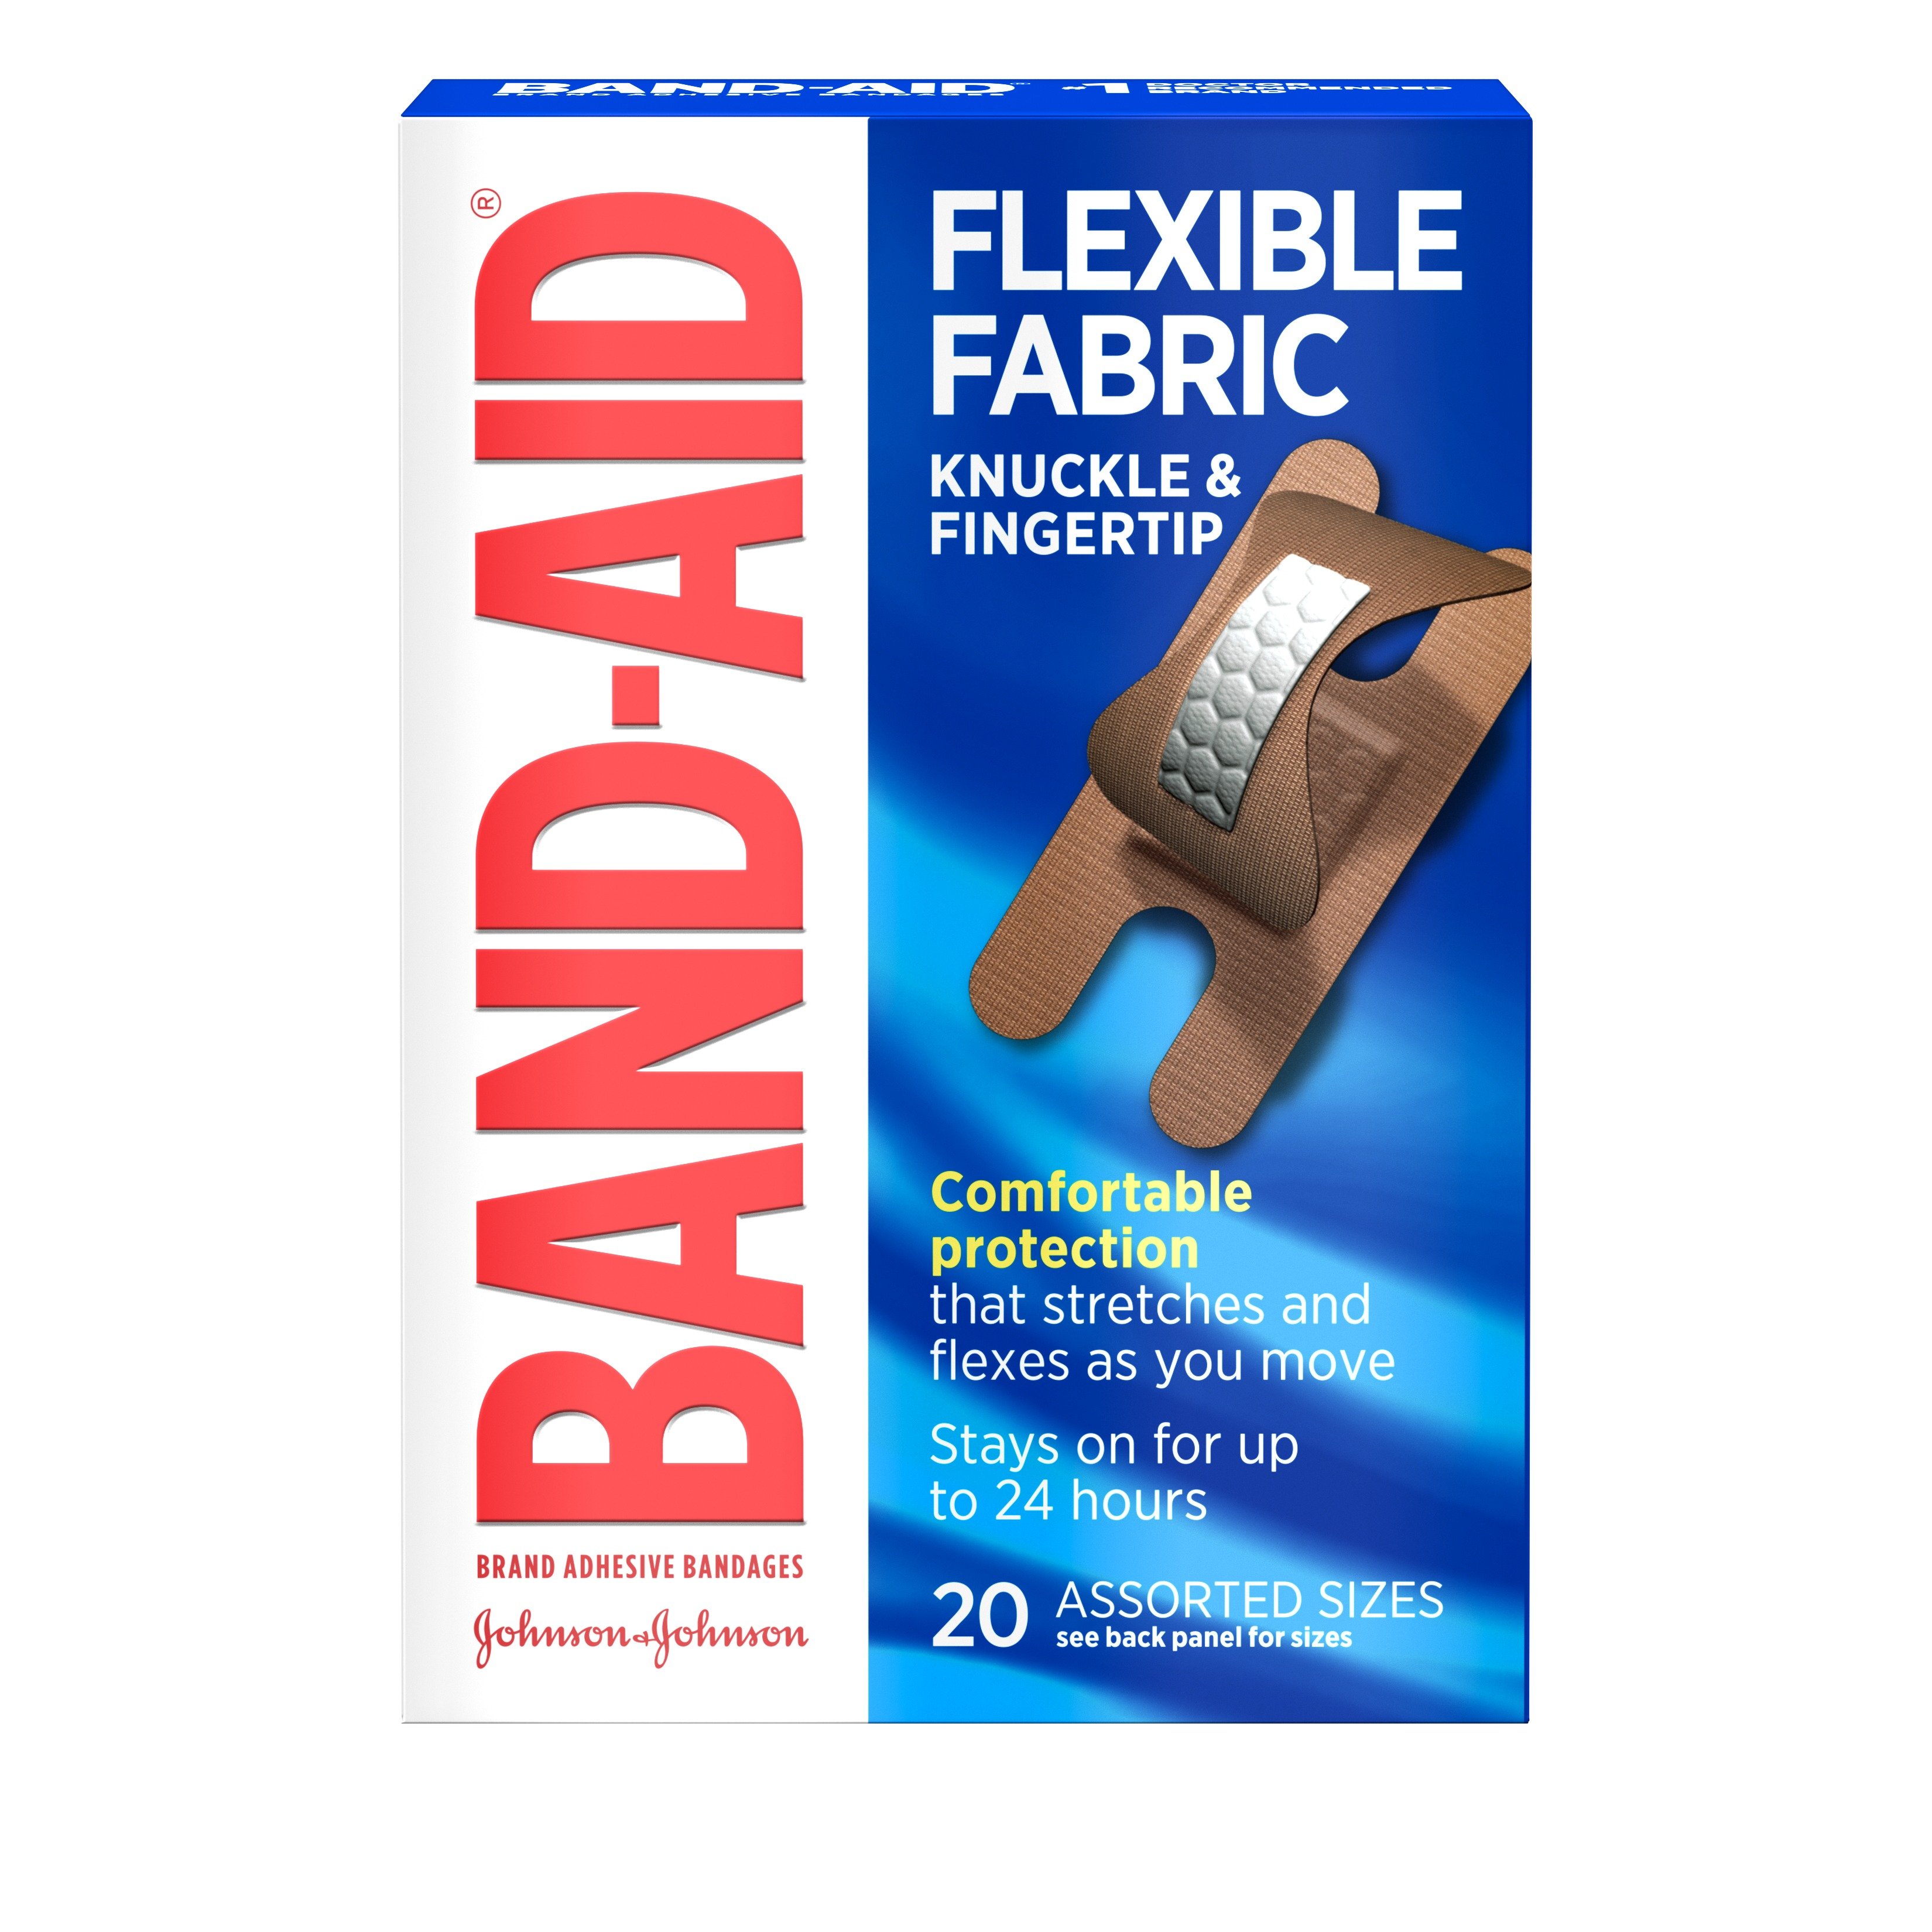  All Health Flexible Fabric Adhesive Bandages, XL 2 in